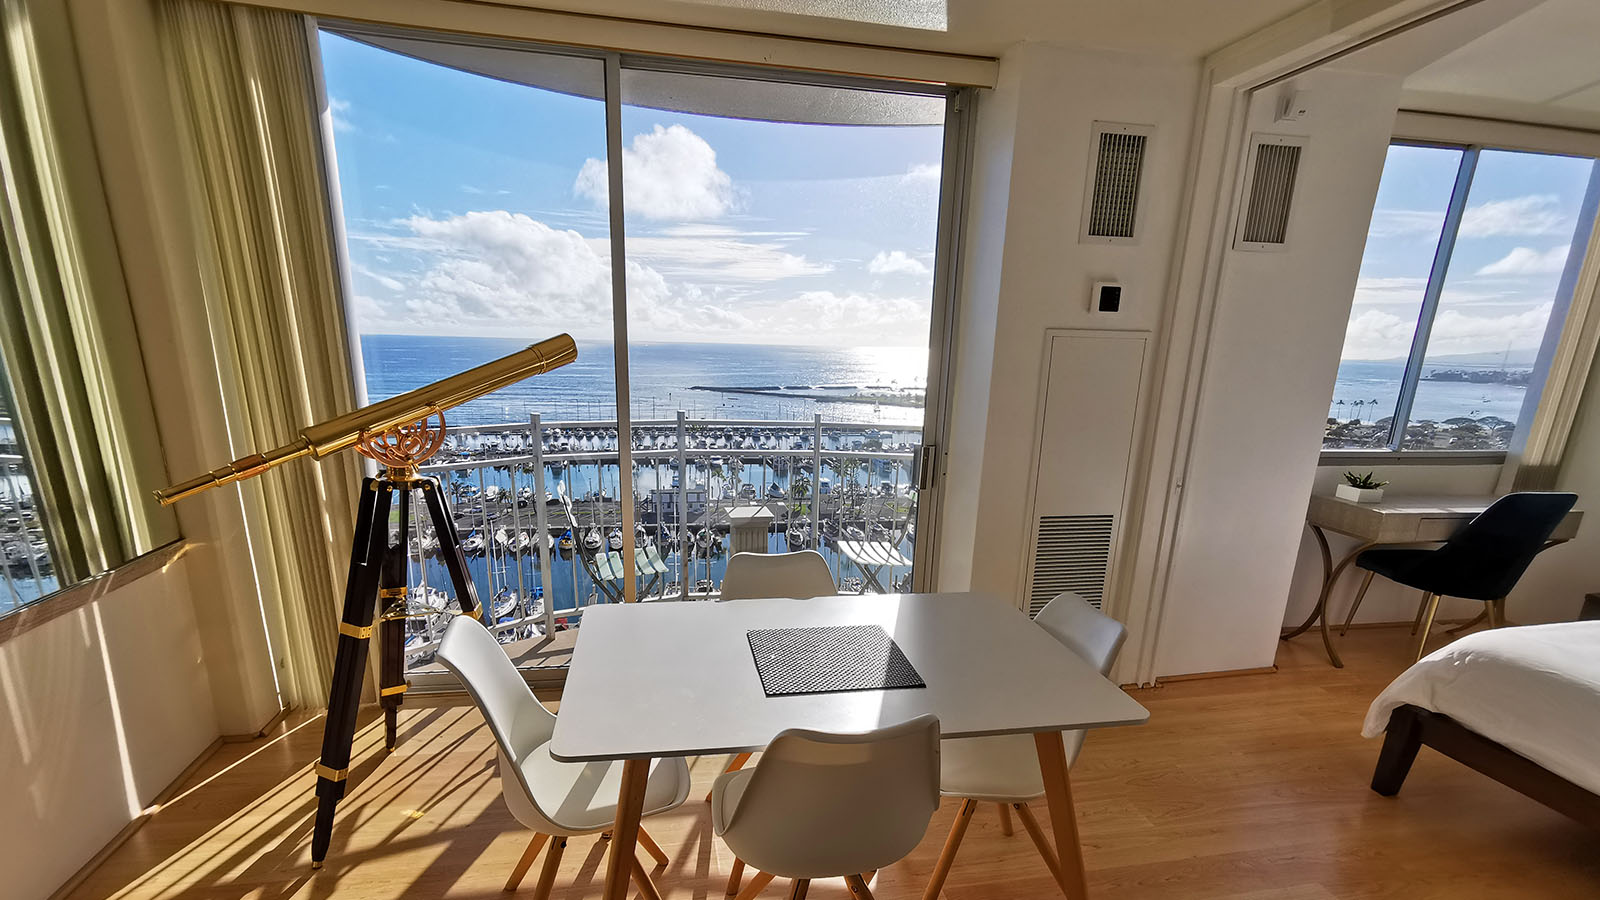 Telescope in an Airbnb